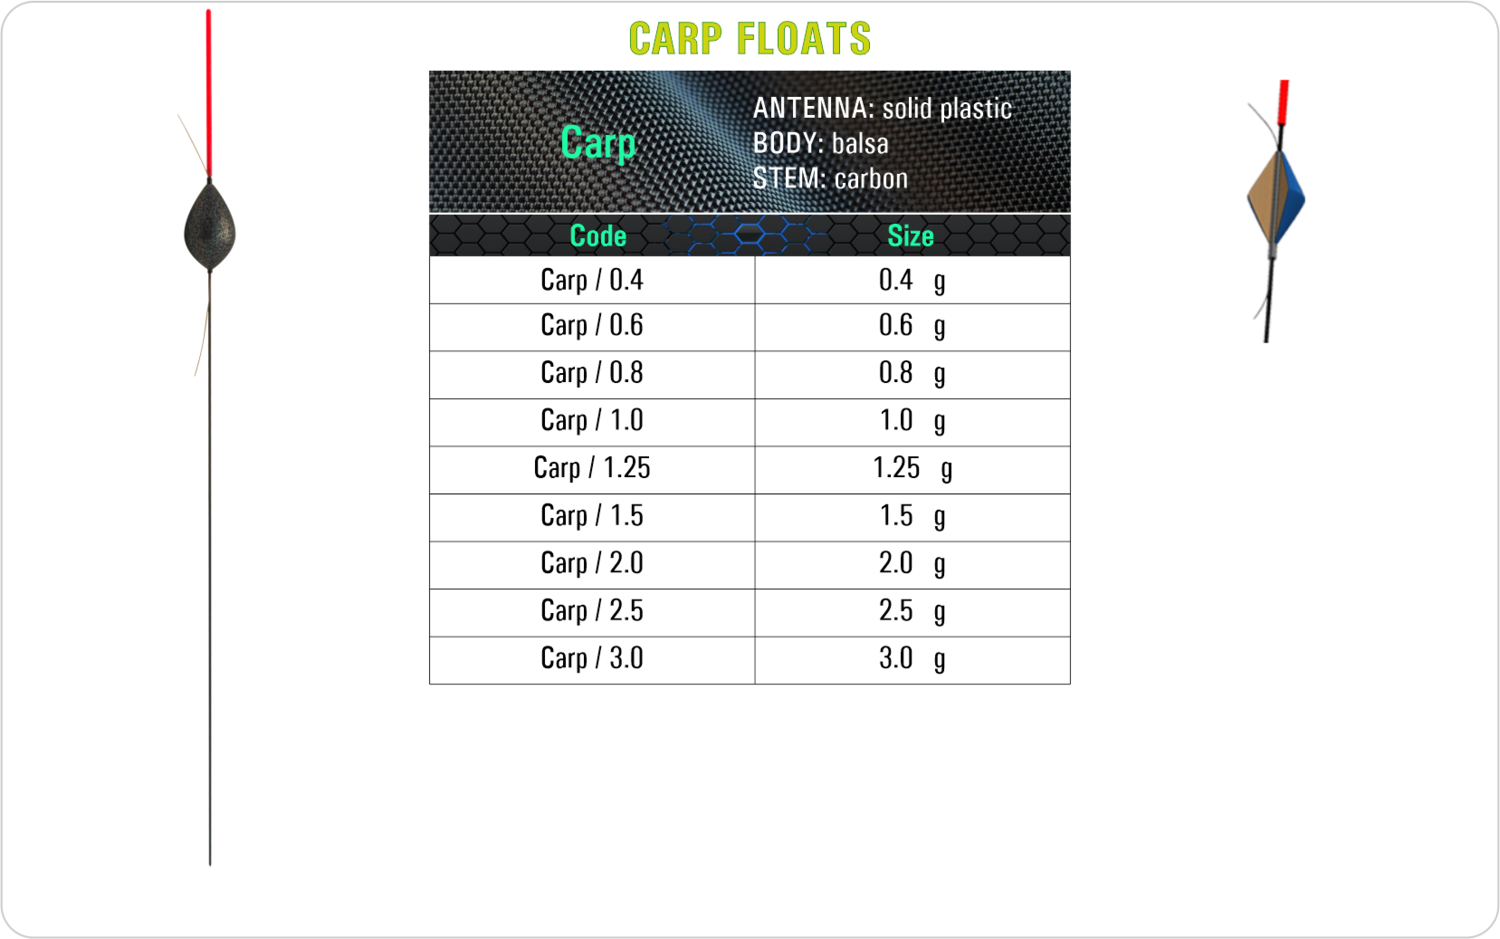 SF Carp Carp float model and table containing an additional information about this float with different codes, sizes, types of the body, the stem and the antenna of the float.